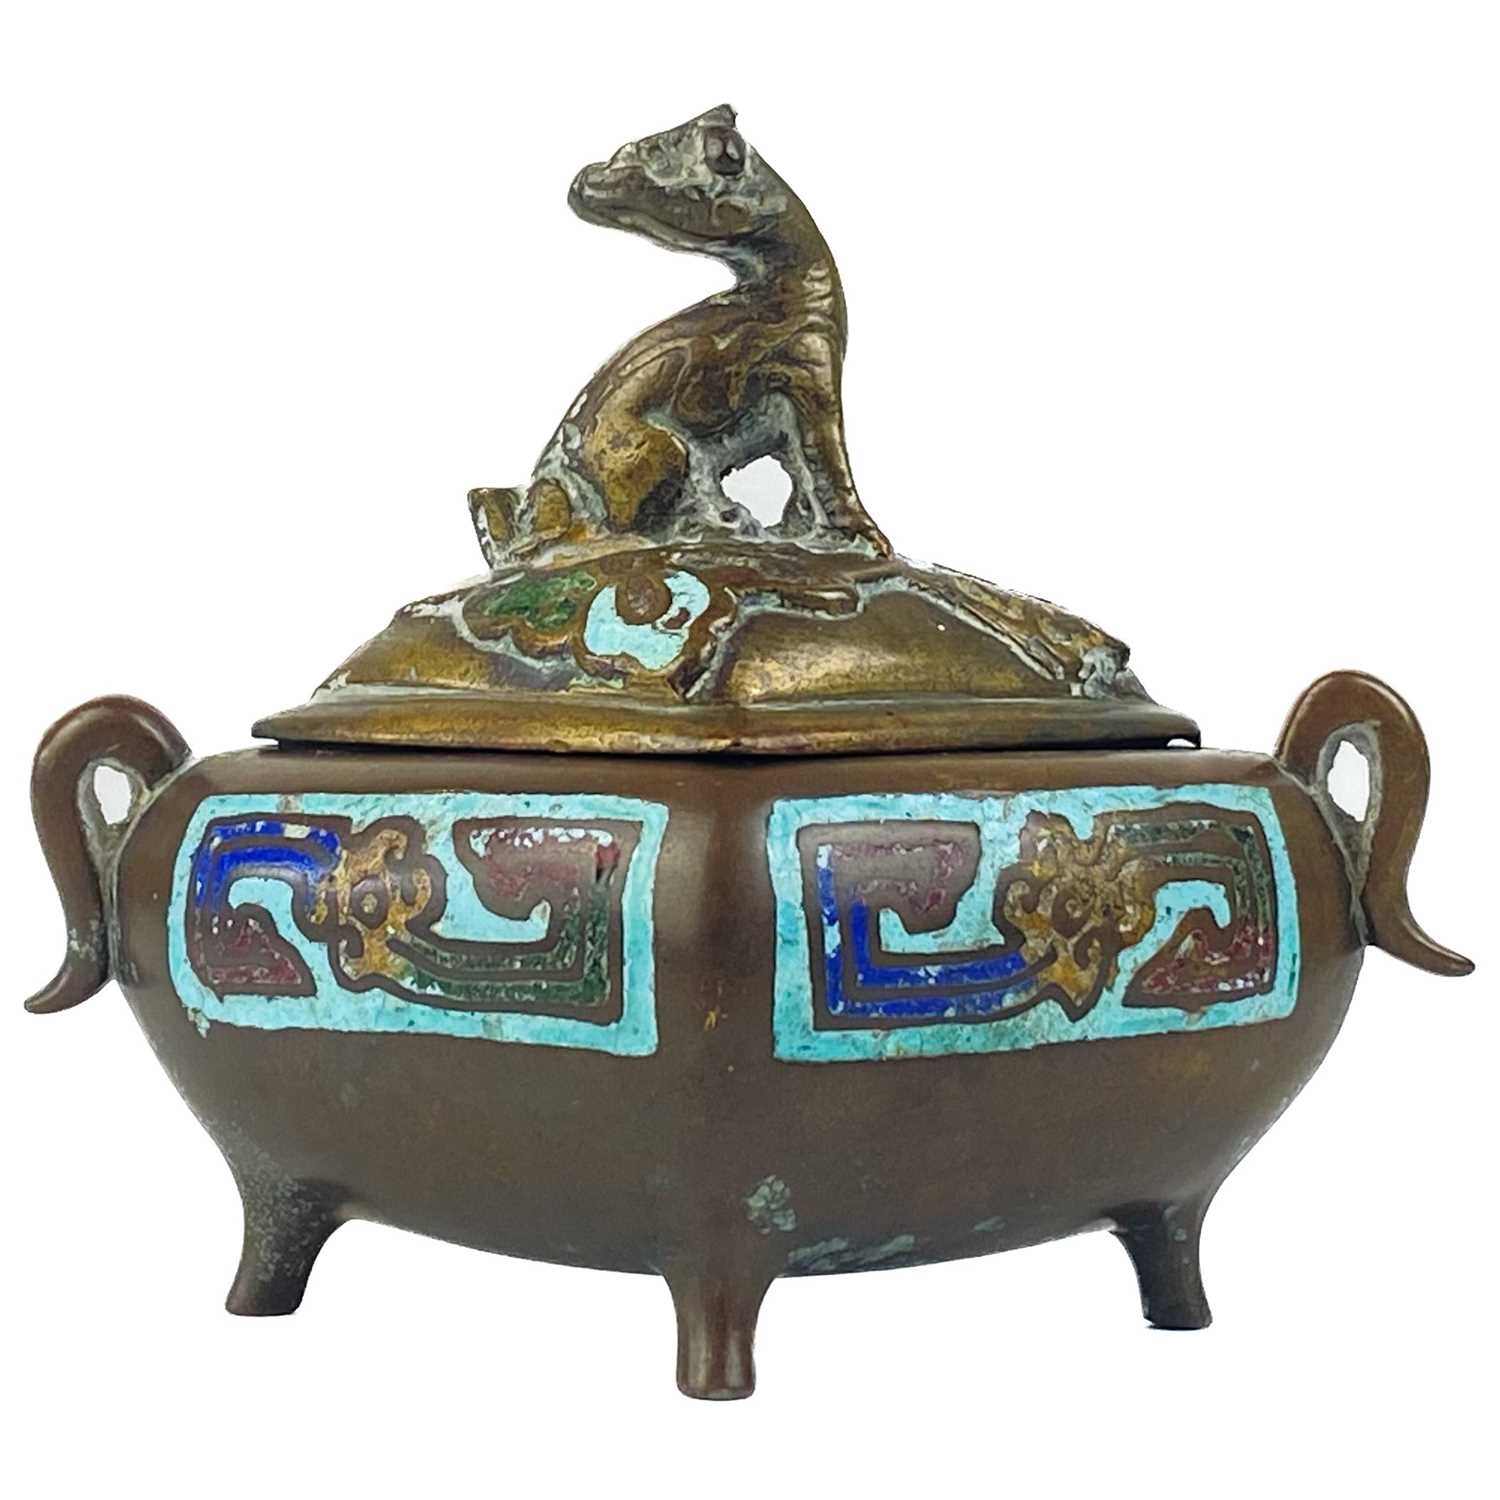 A Chinese bronze and champleve incense burner, 19th century. - Image 2 of 9